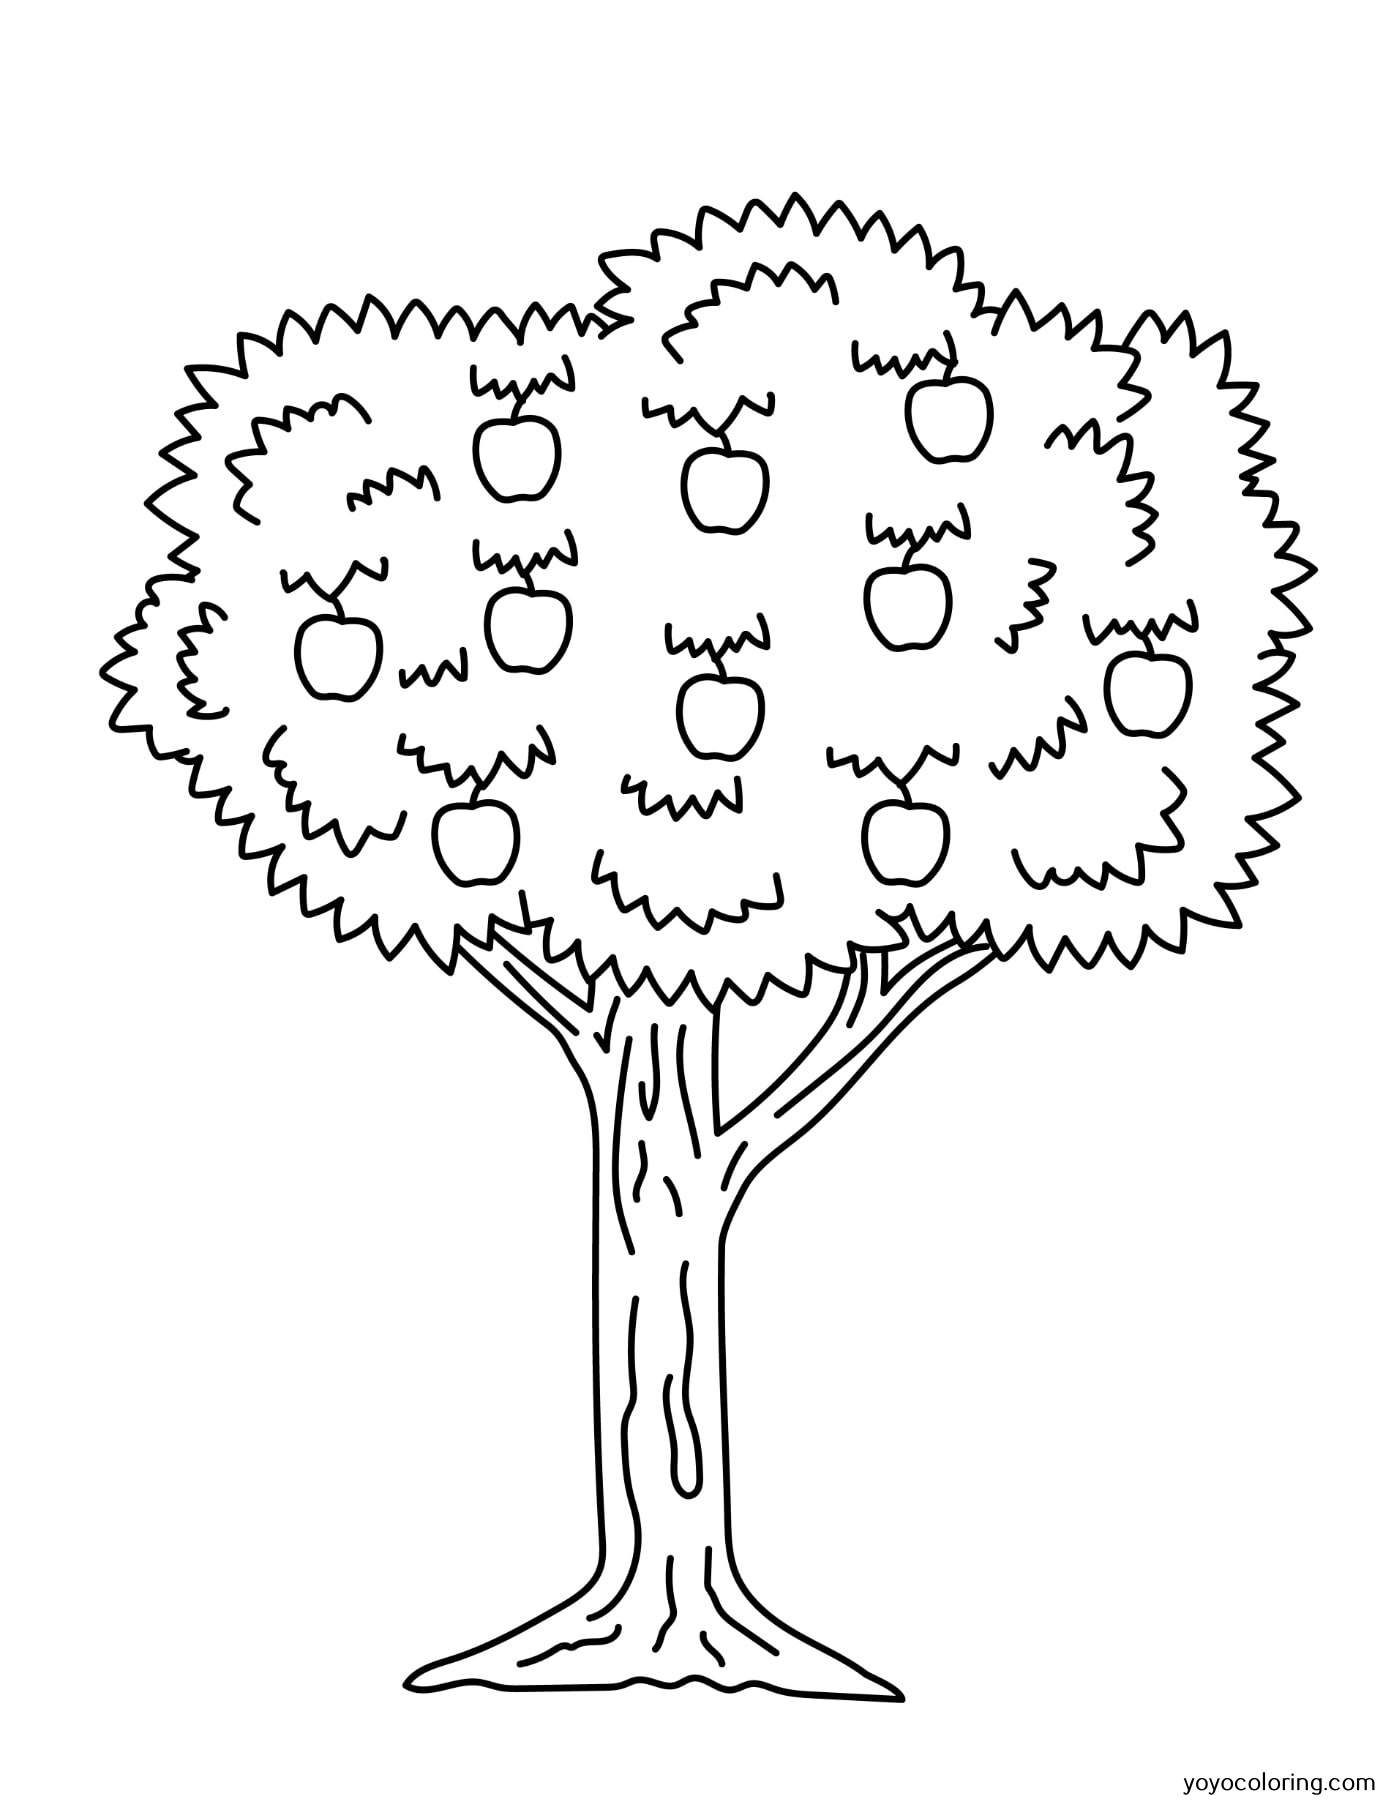 apple-tree-coloring-pages-printable-painting-template